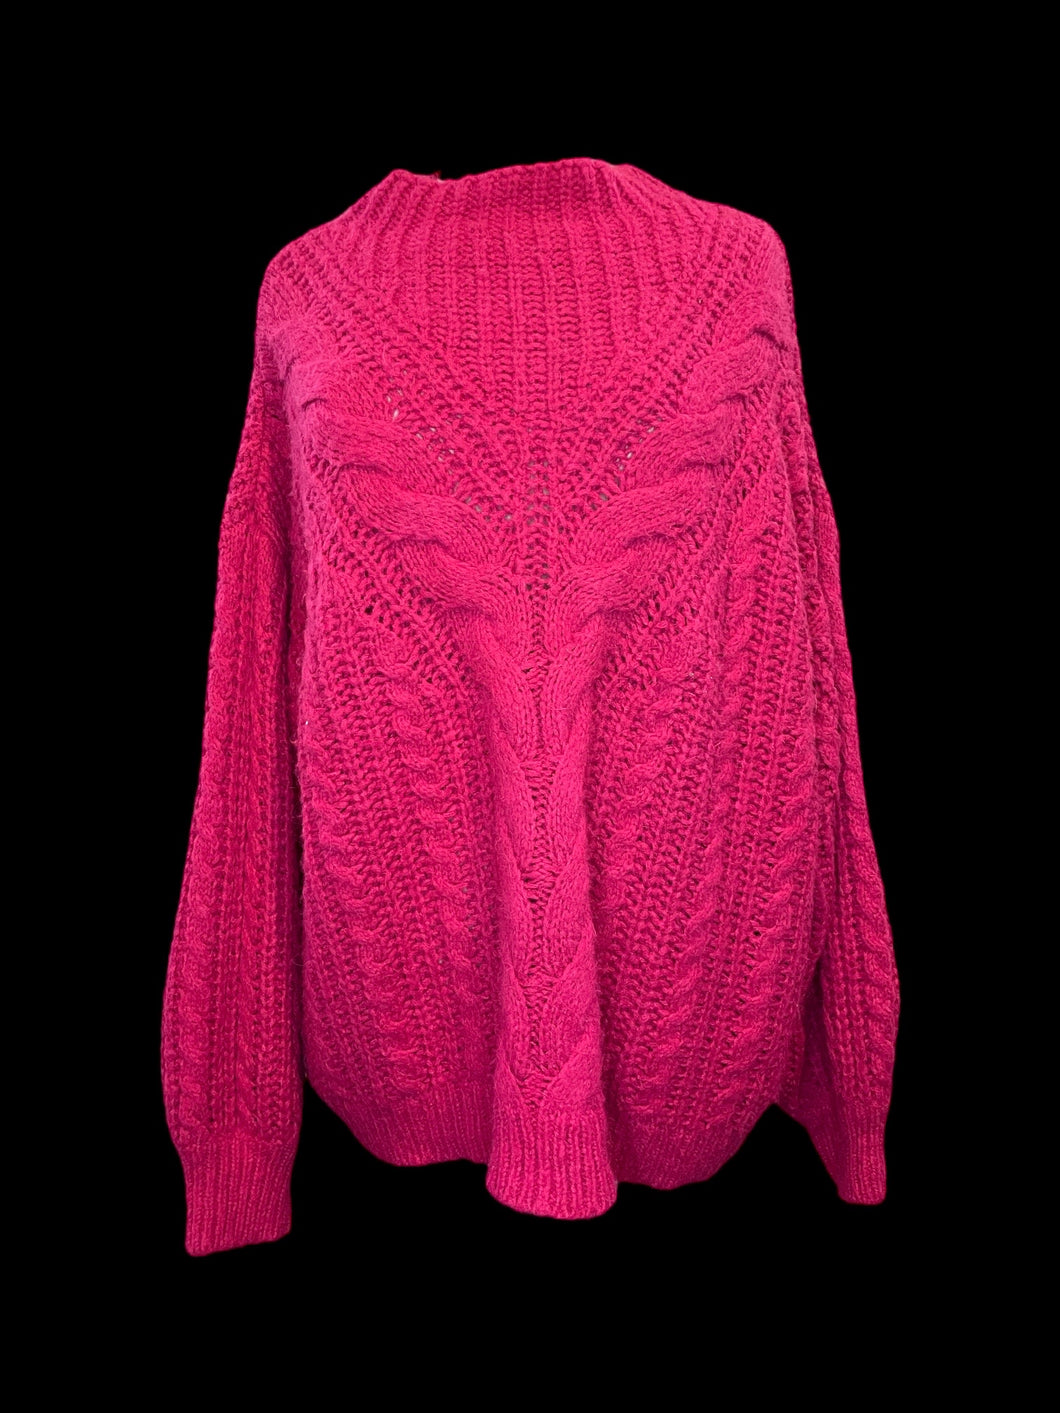 4X Hot pink cable knit long sleeve high neckline sweater